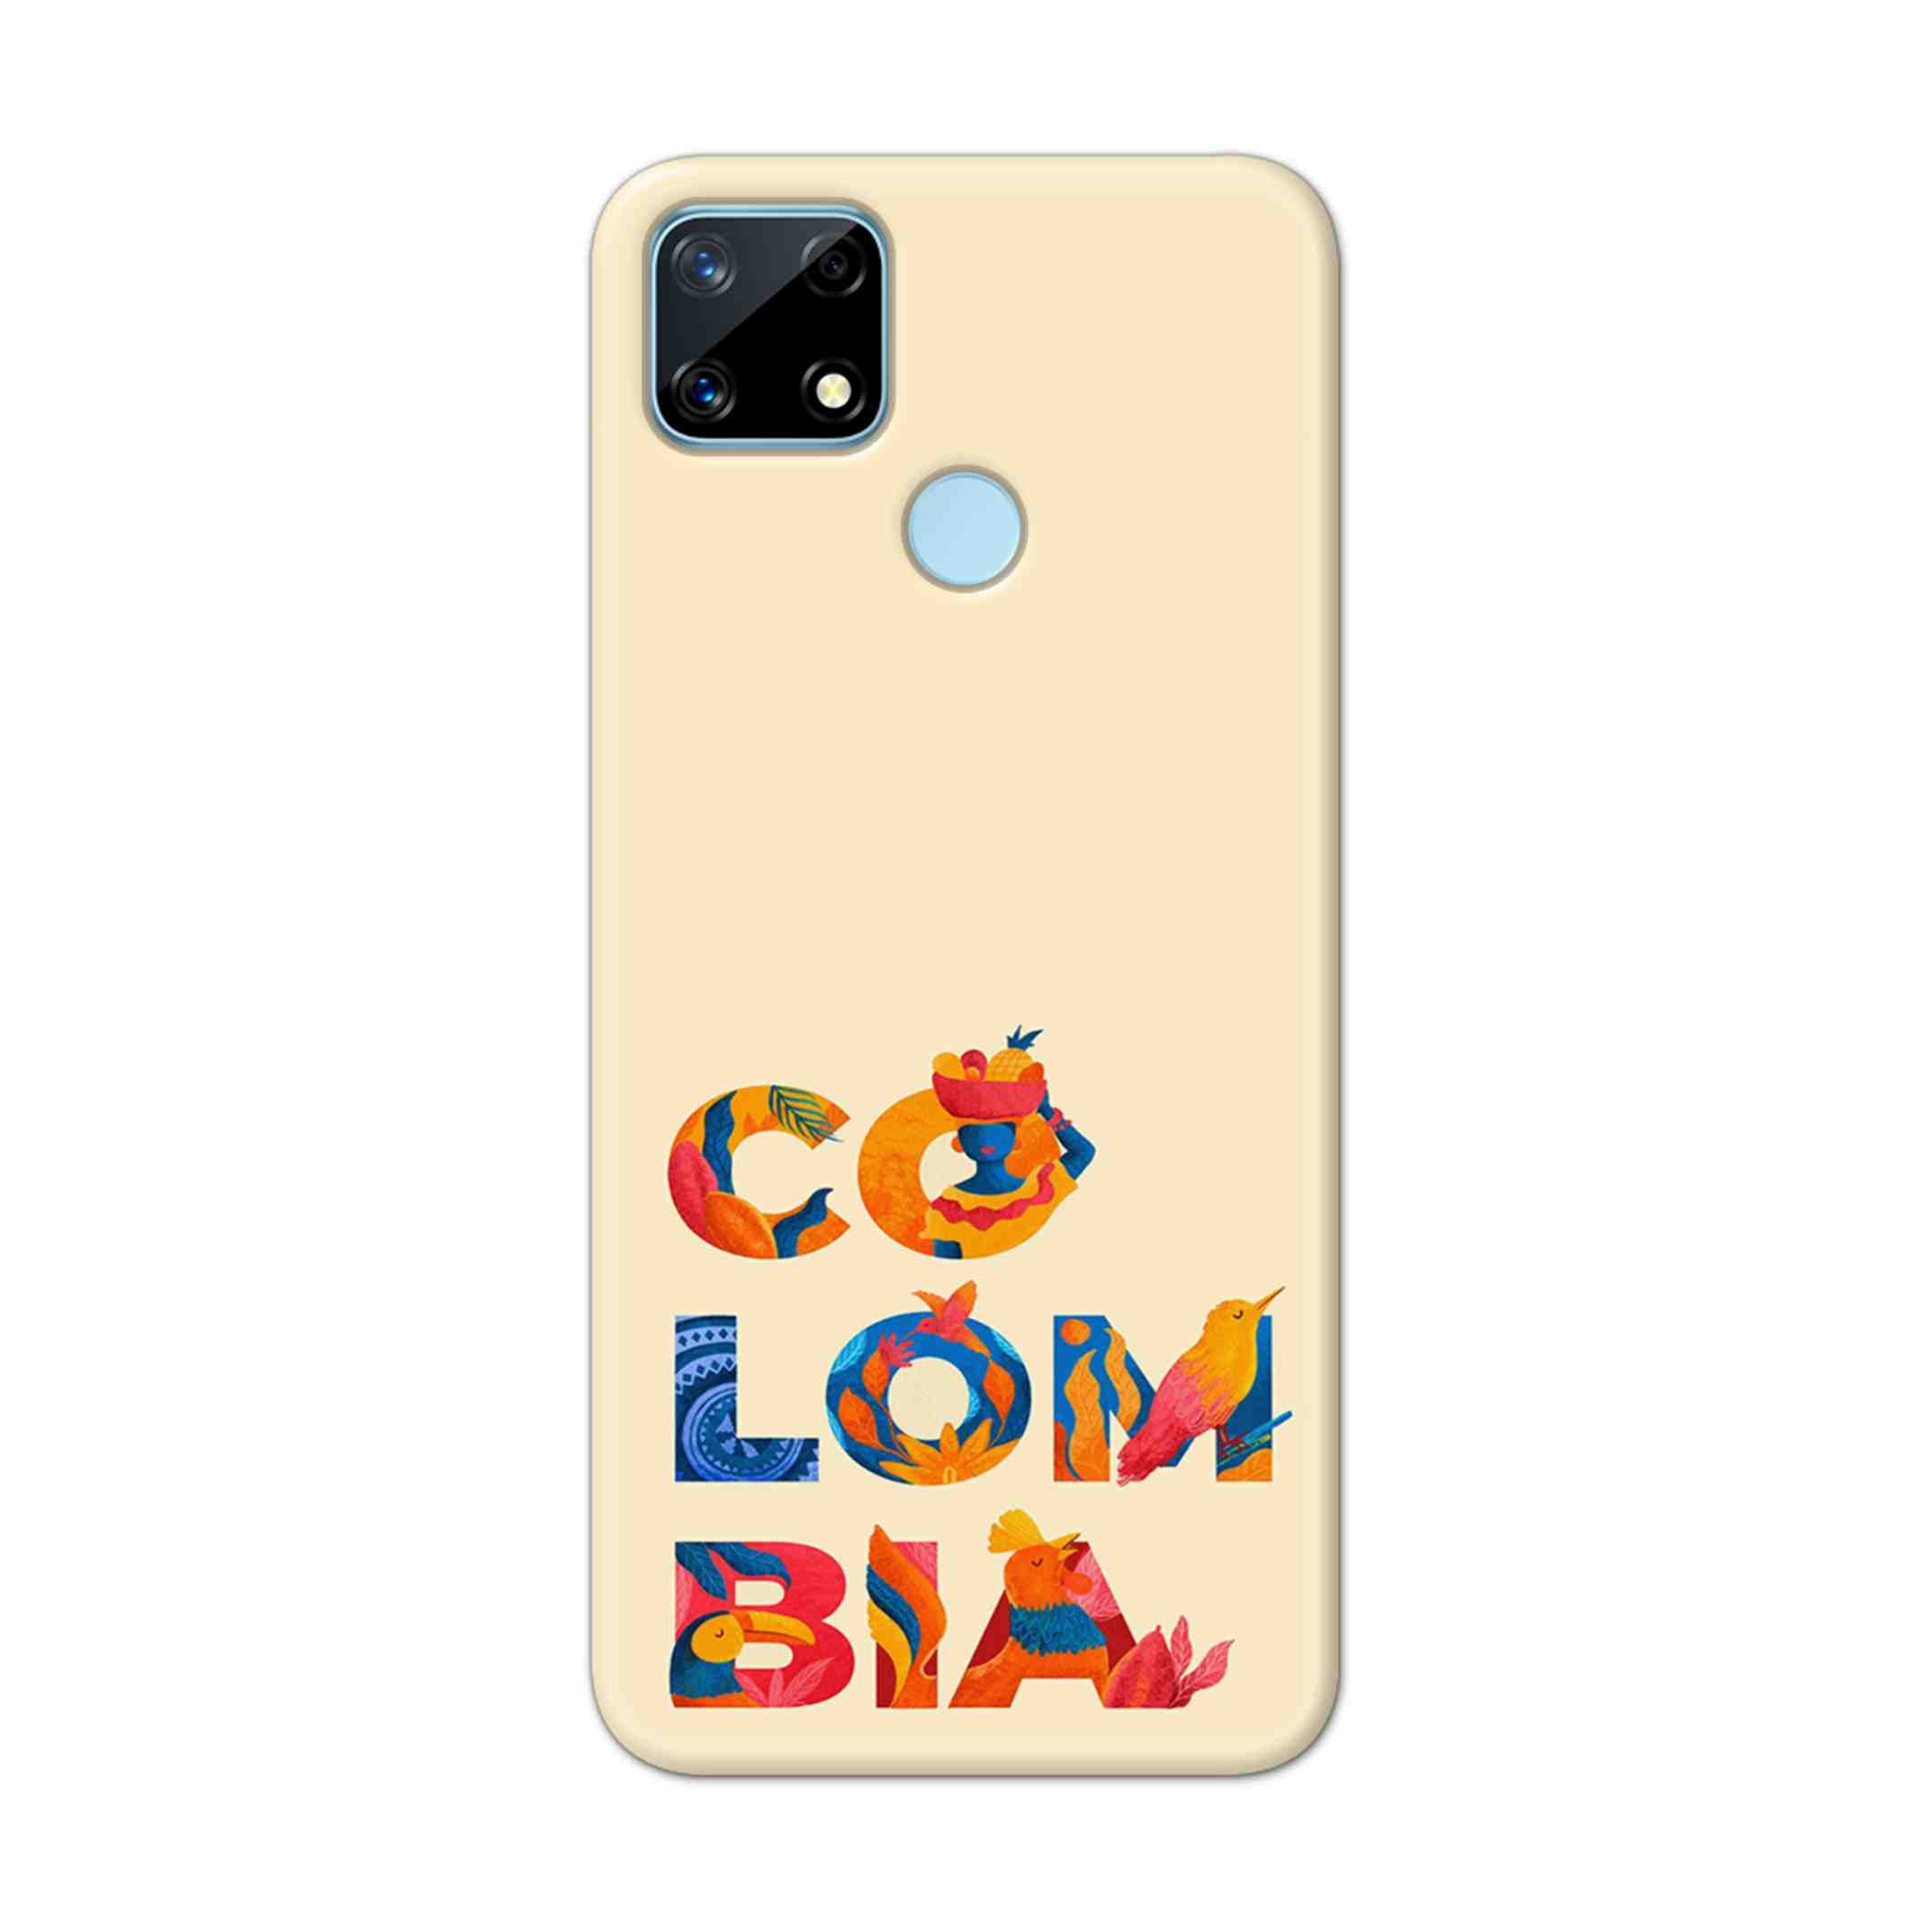 Buy Colombia Hard Back Mobile Phone Case Cover For Realme Narzo 20 Online